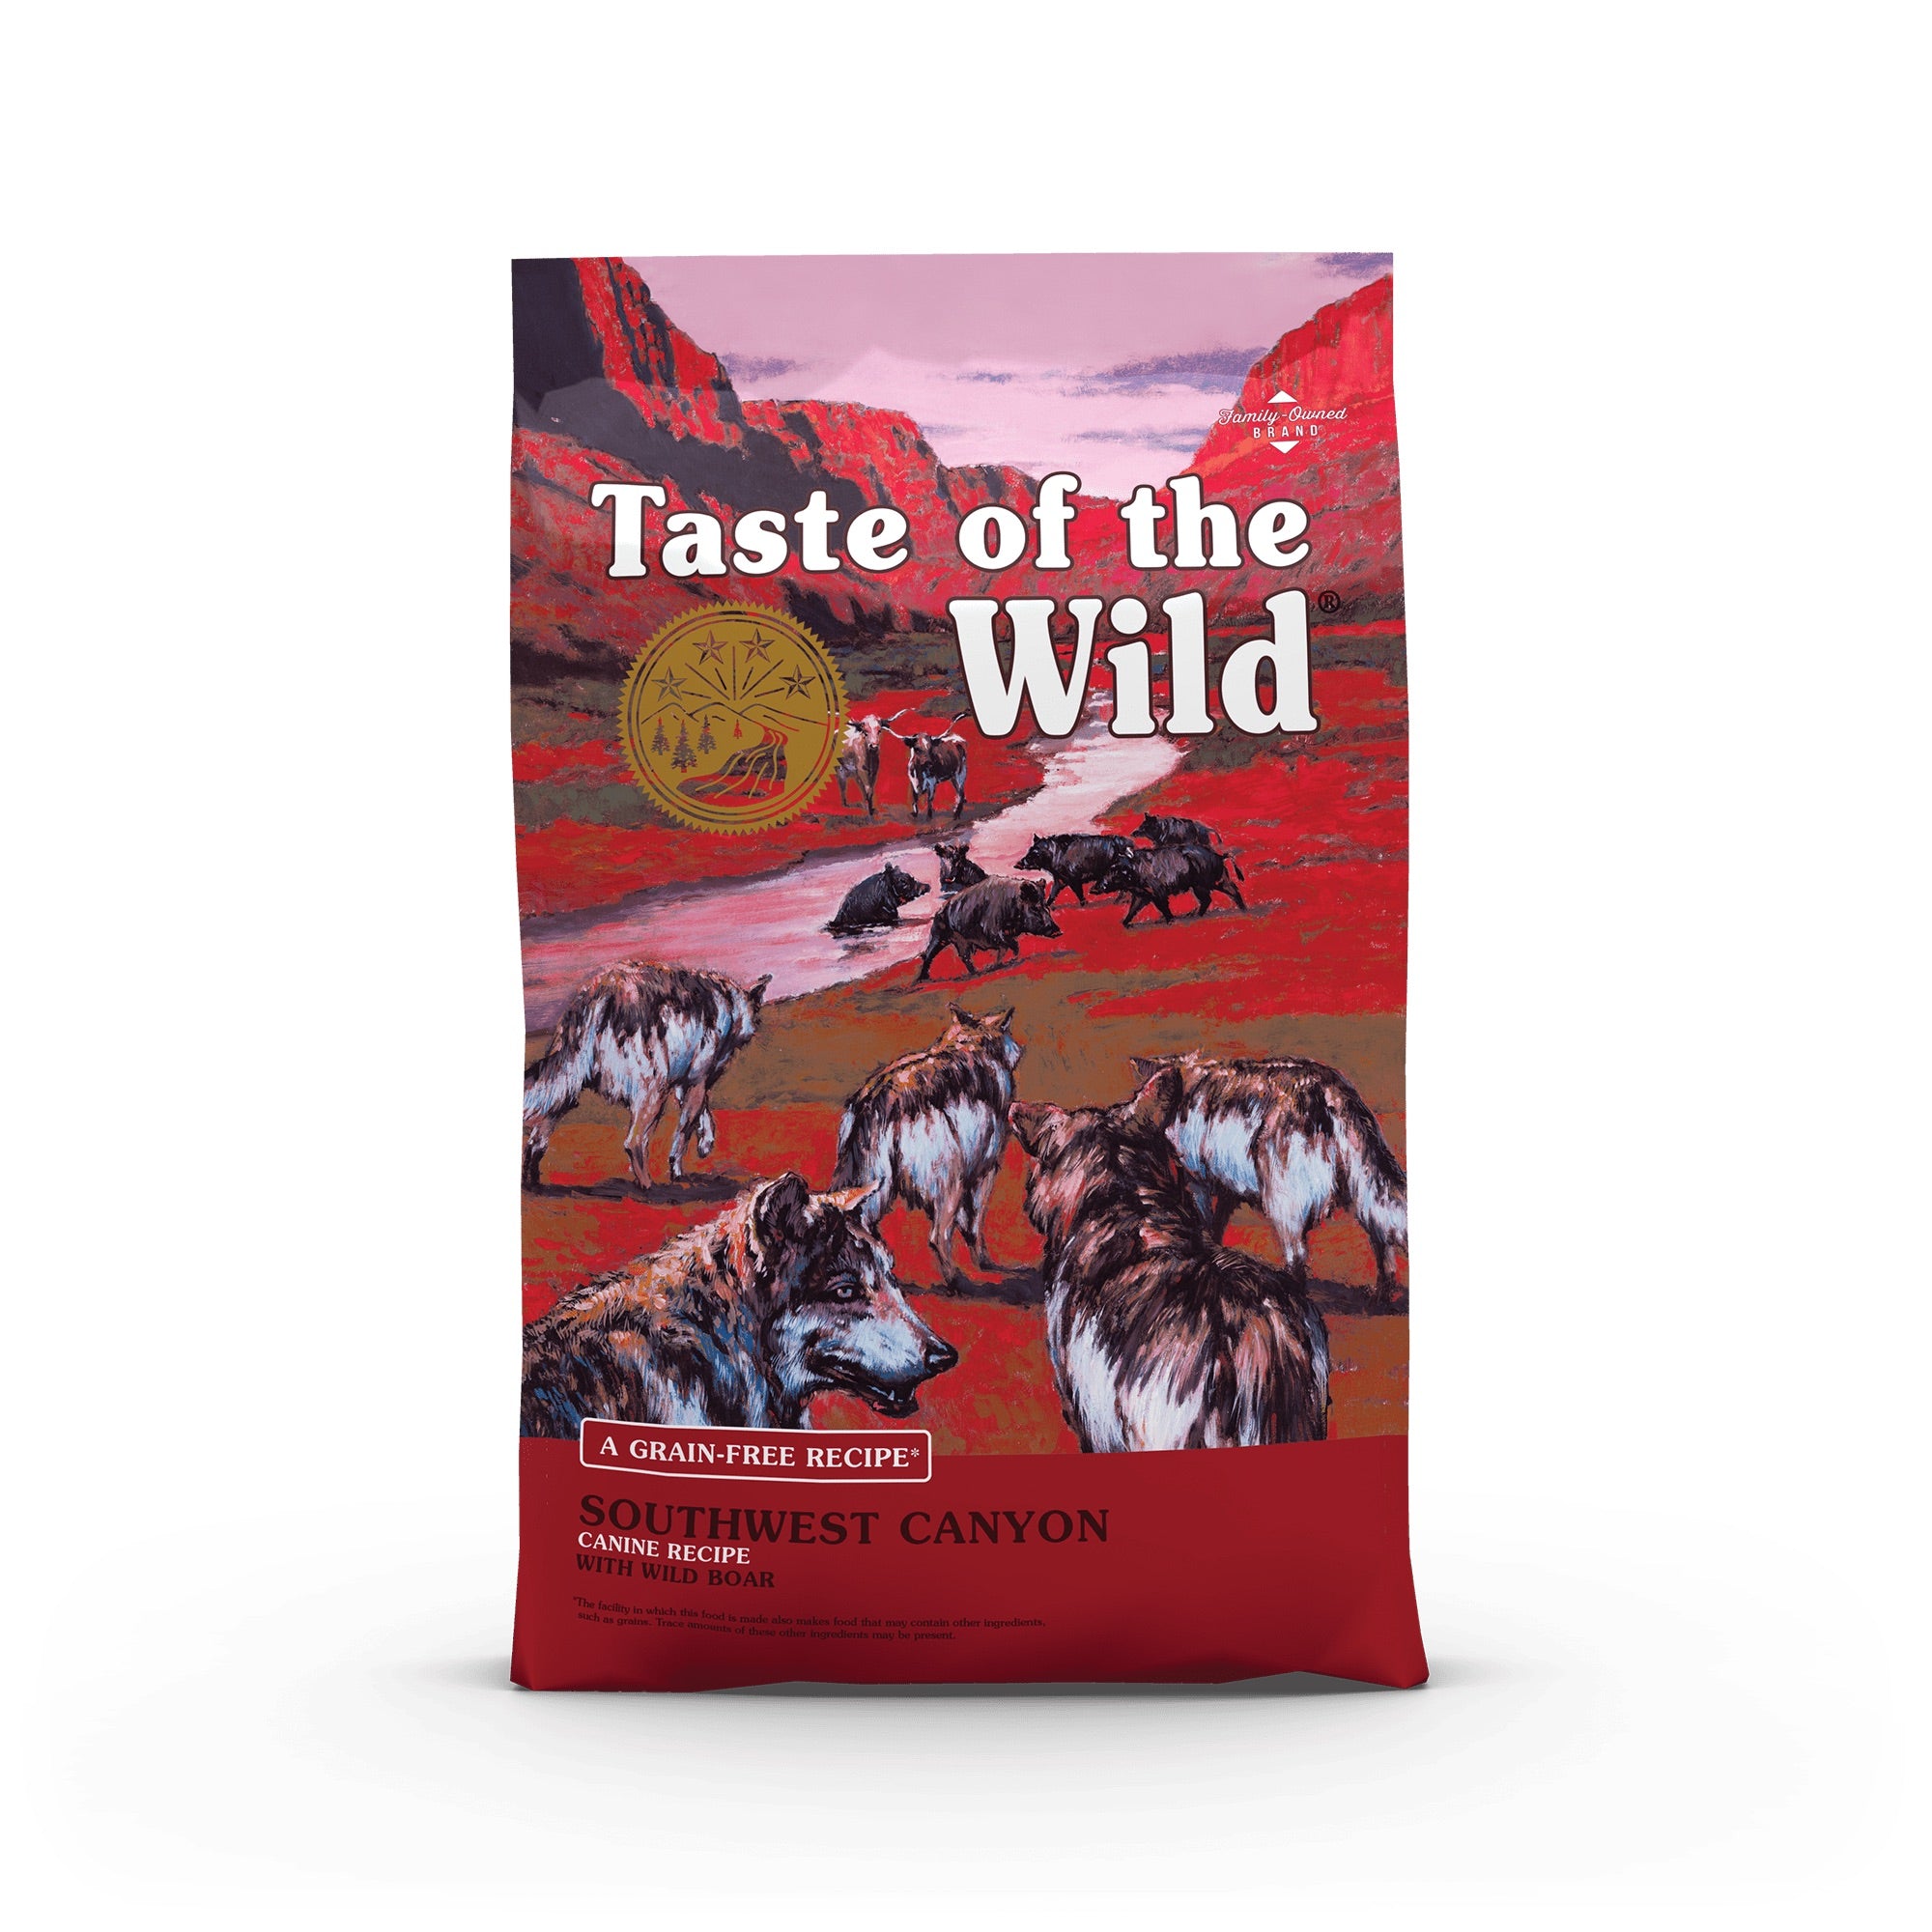 Taste of the Wild Grain Free Southwest Canyon Canine 5 LB